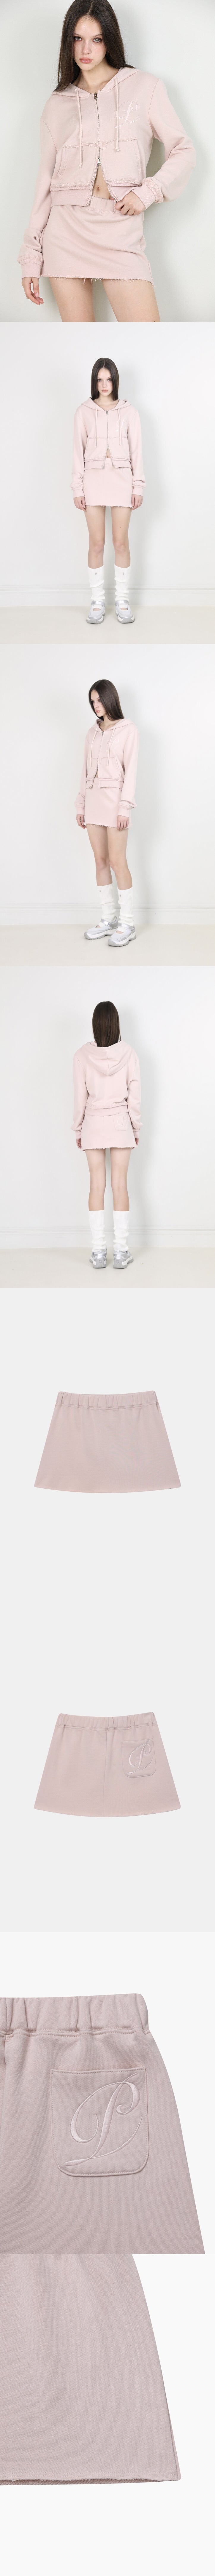 P-LOGO EMBROIDERY VINTAGE MINI SKIRT (BABY PINK)